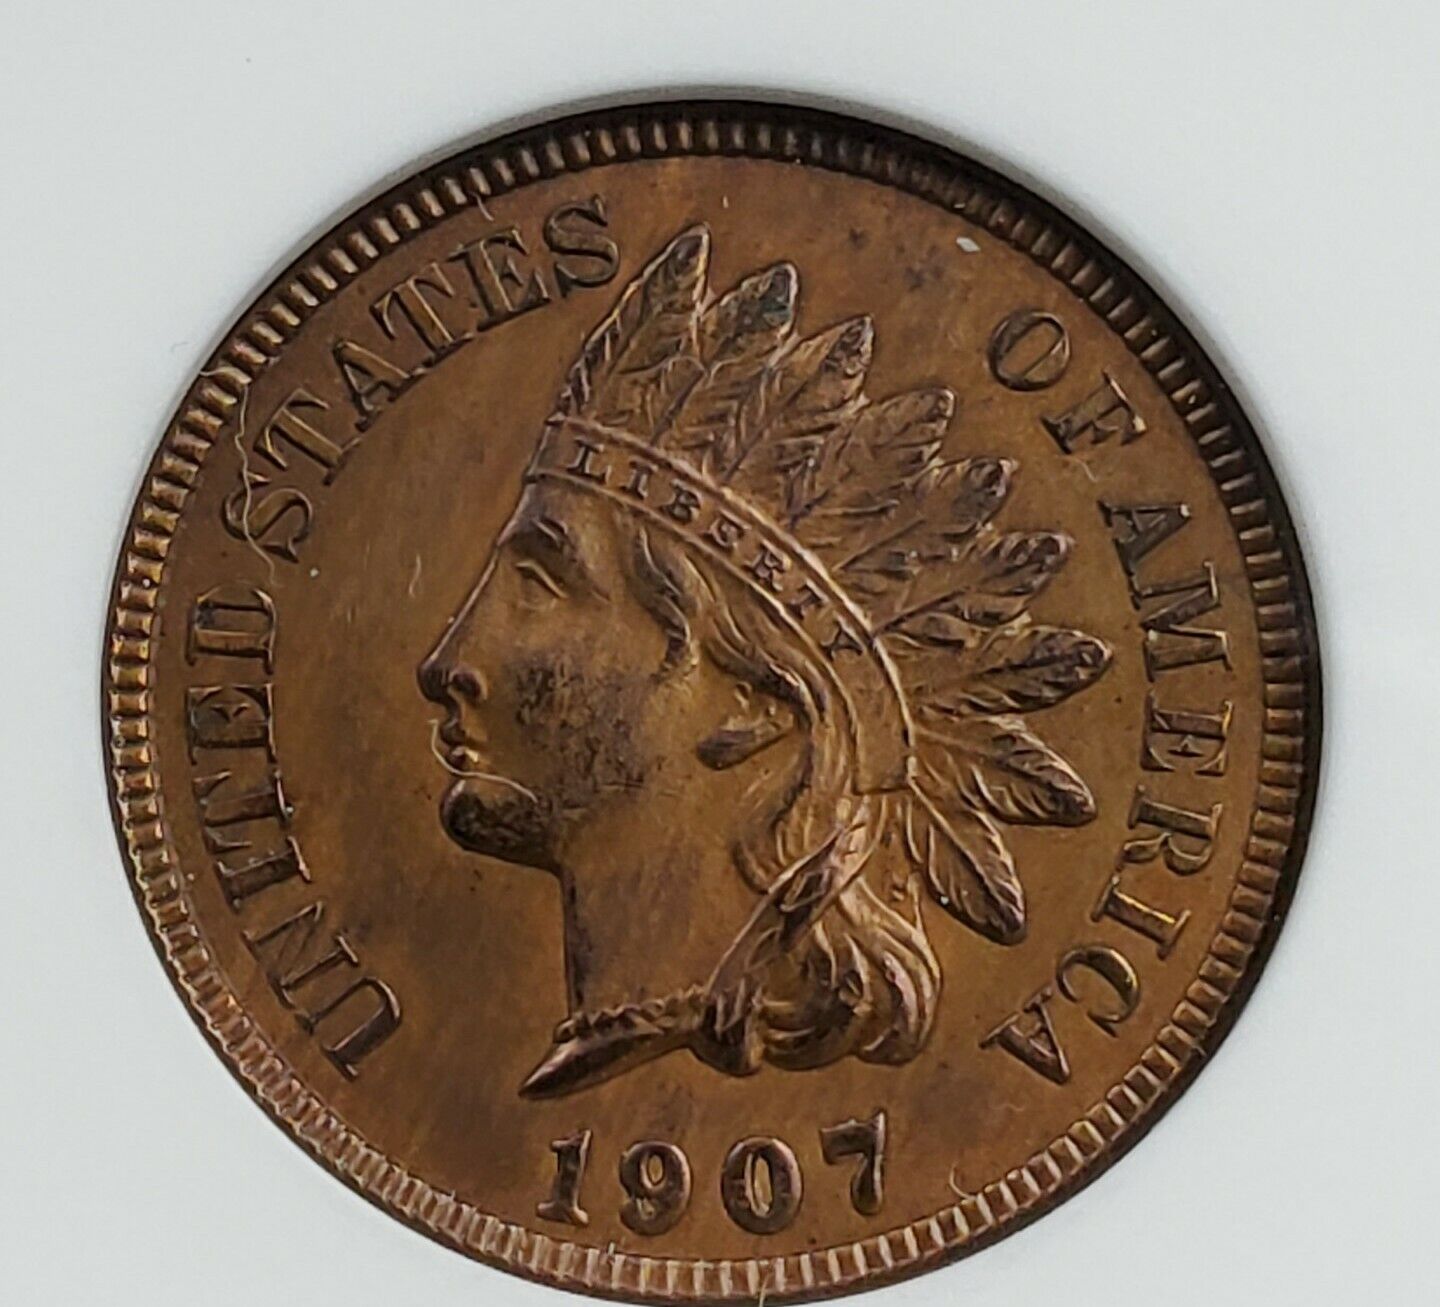 1907 P Indian Cent Penny Coin ANACS Unc Details RPD S-26 Repunched Date